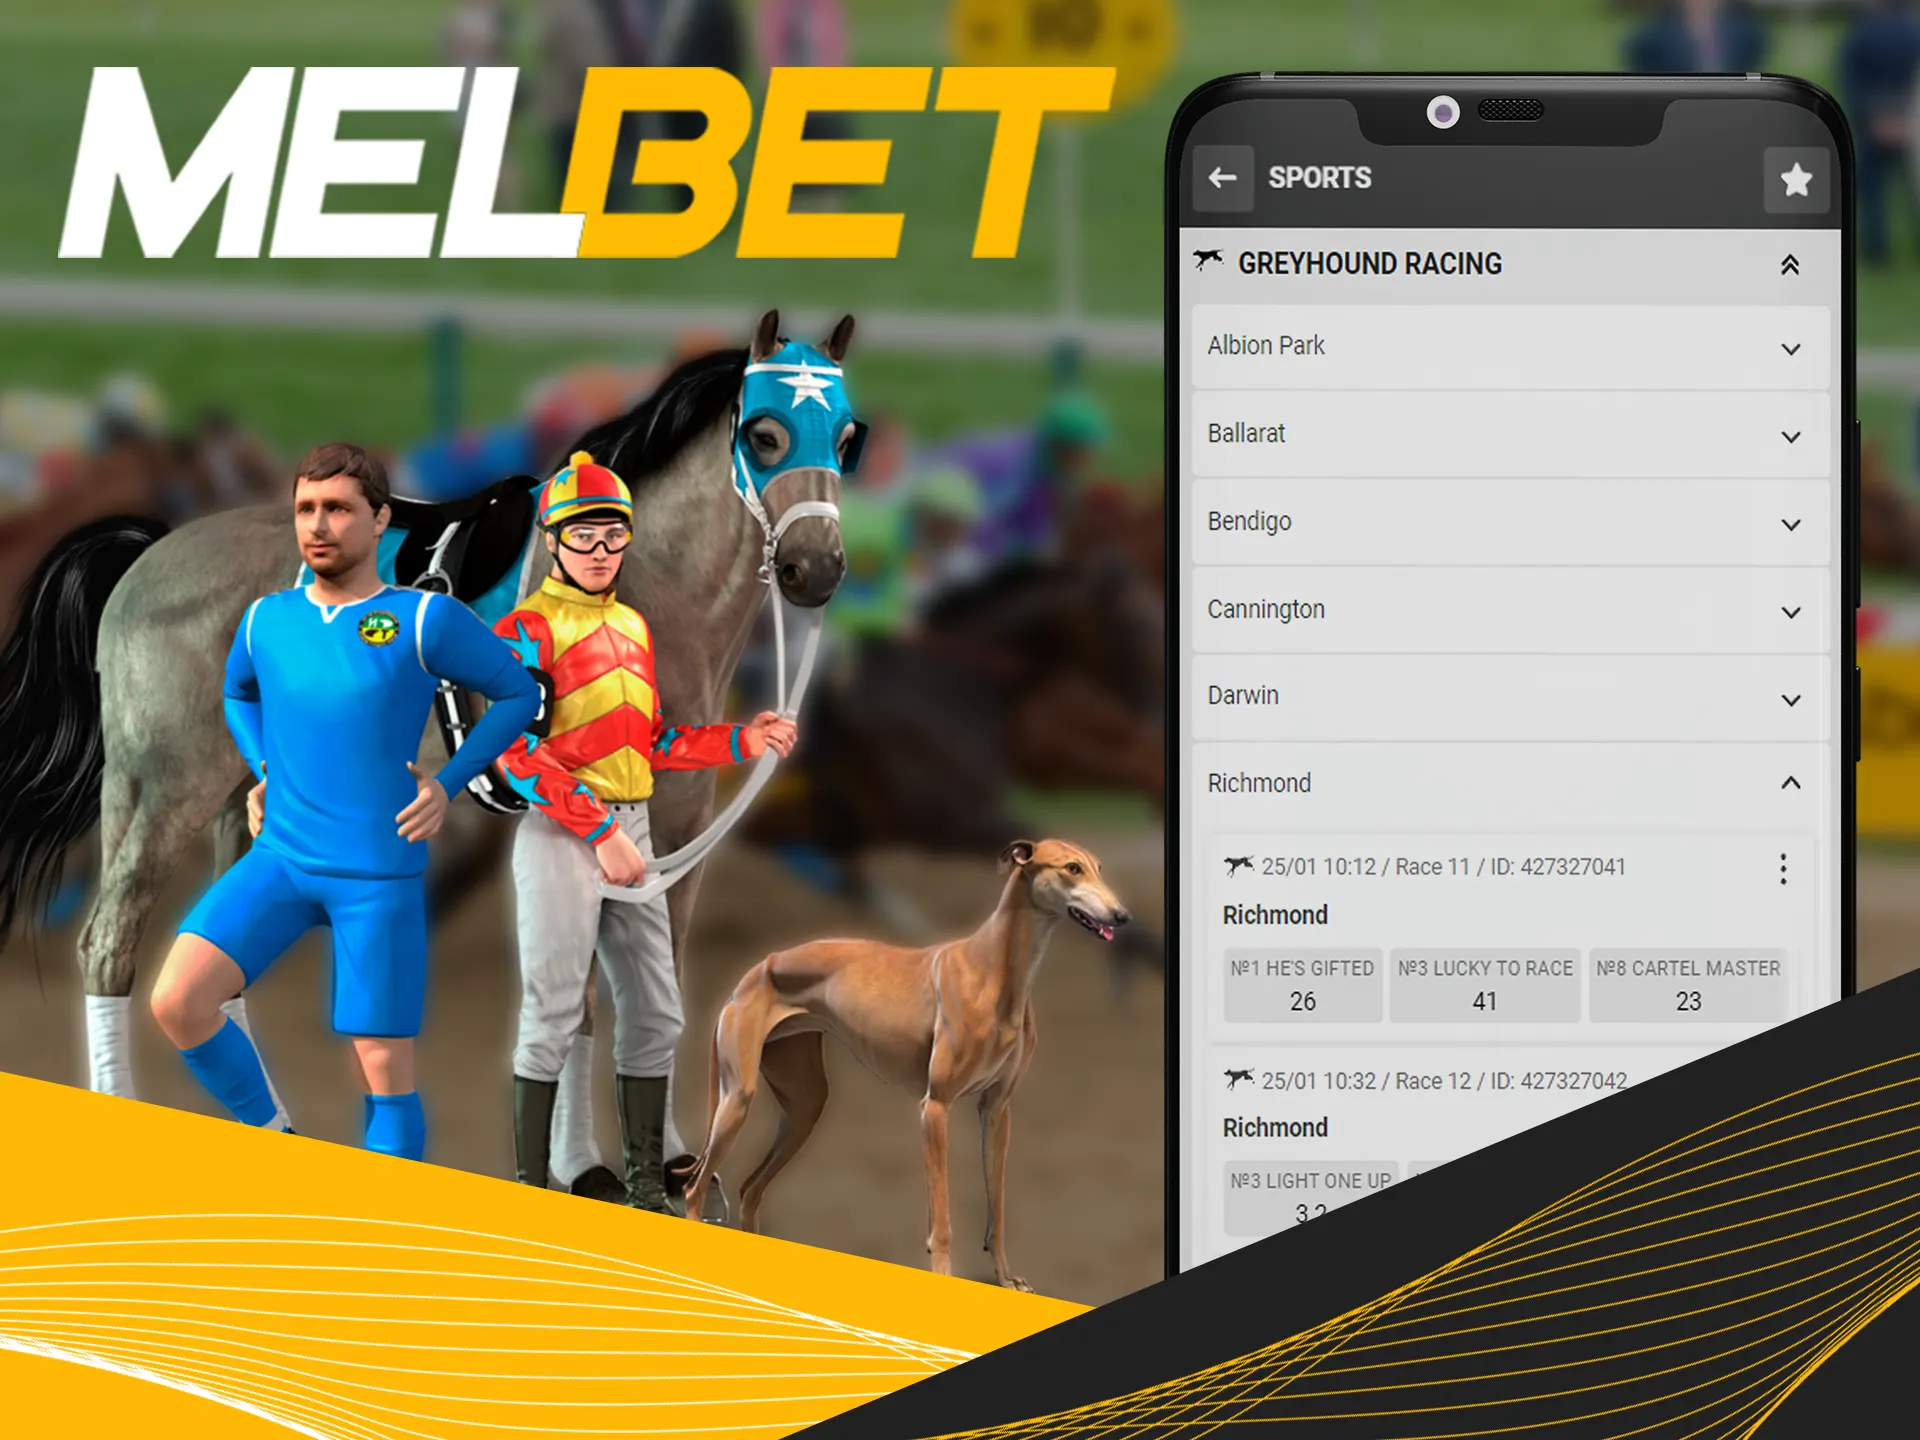 You can bet on virtual sports using Melbet app.